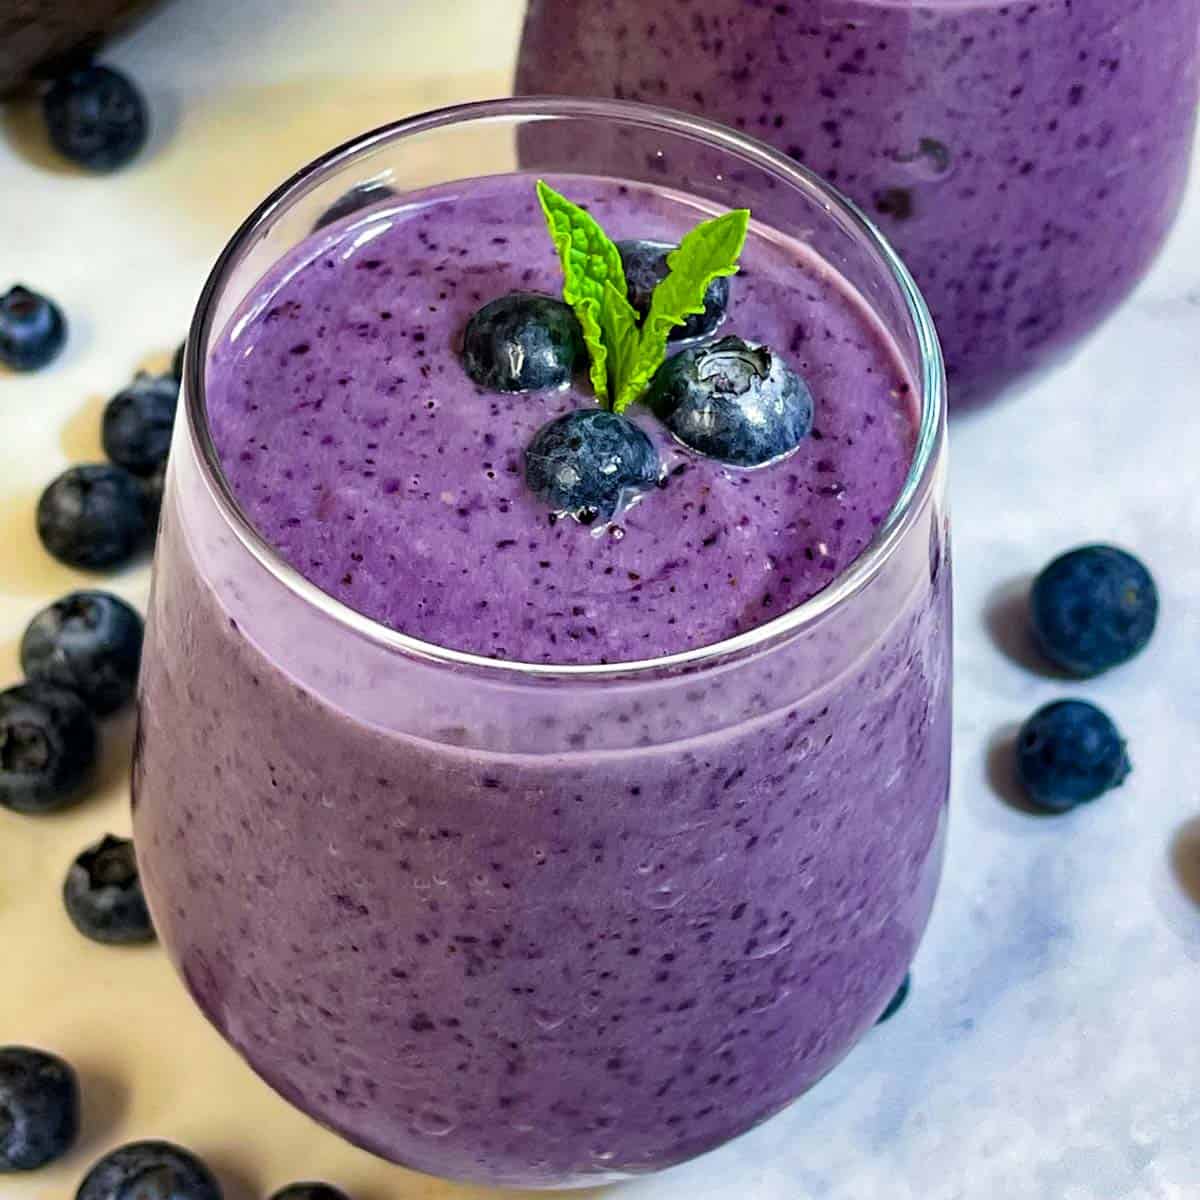 blueberry avocado smoothie served in glasses topped with mint leaf and blueberries